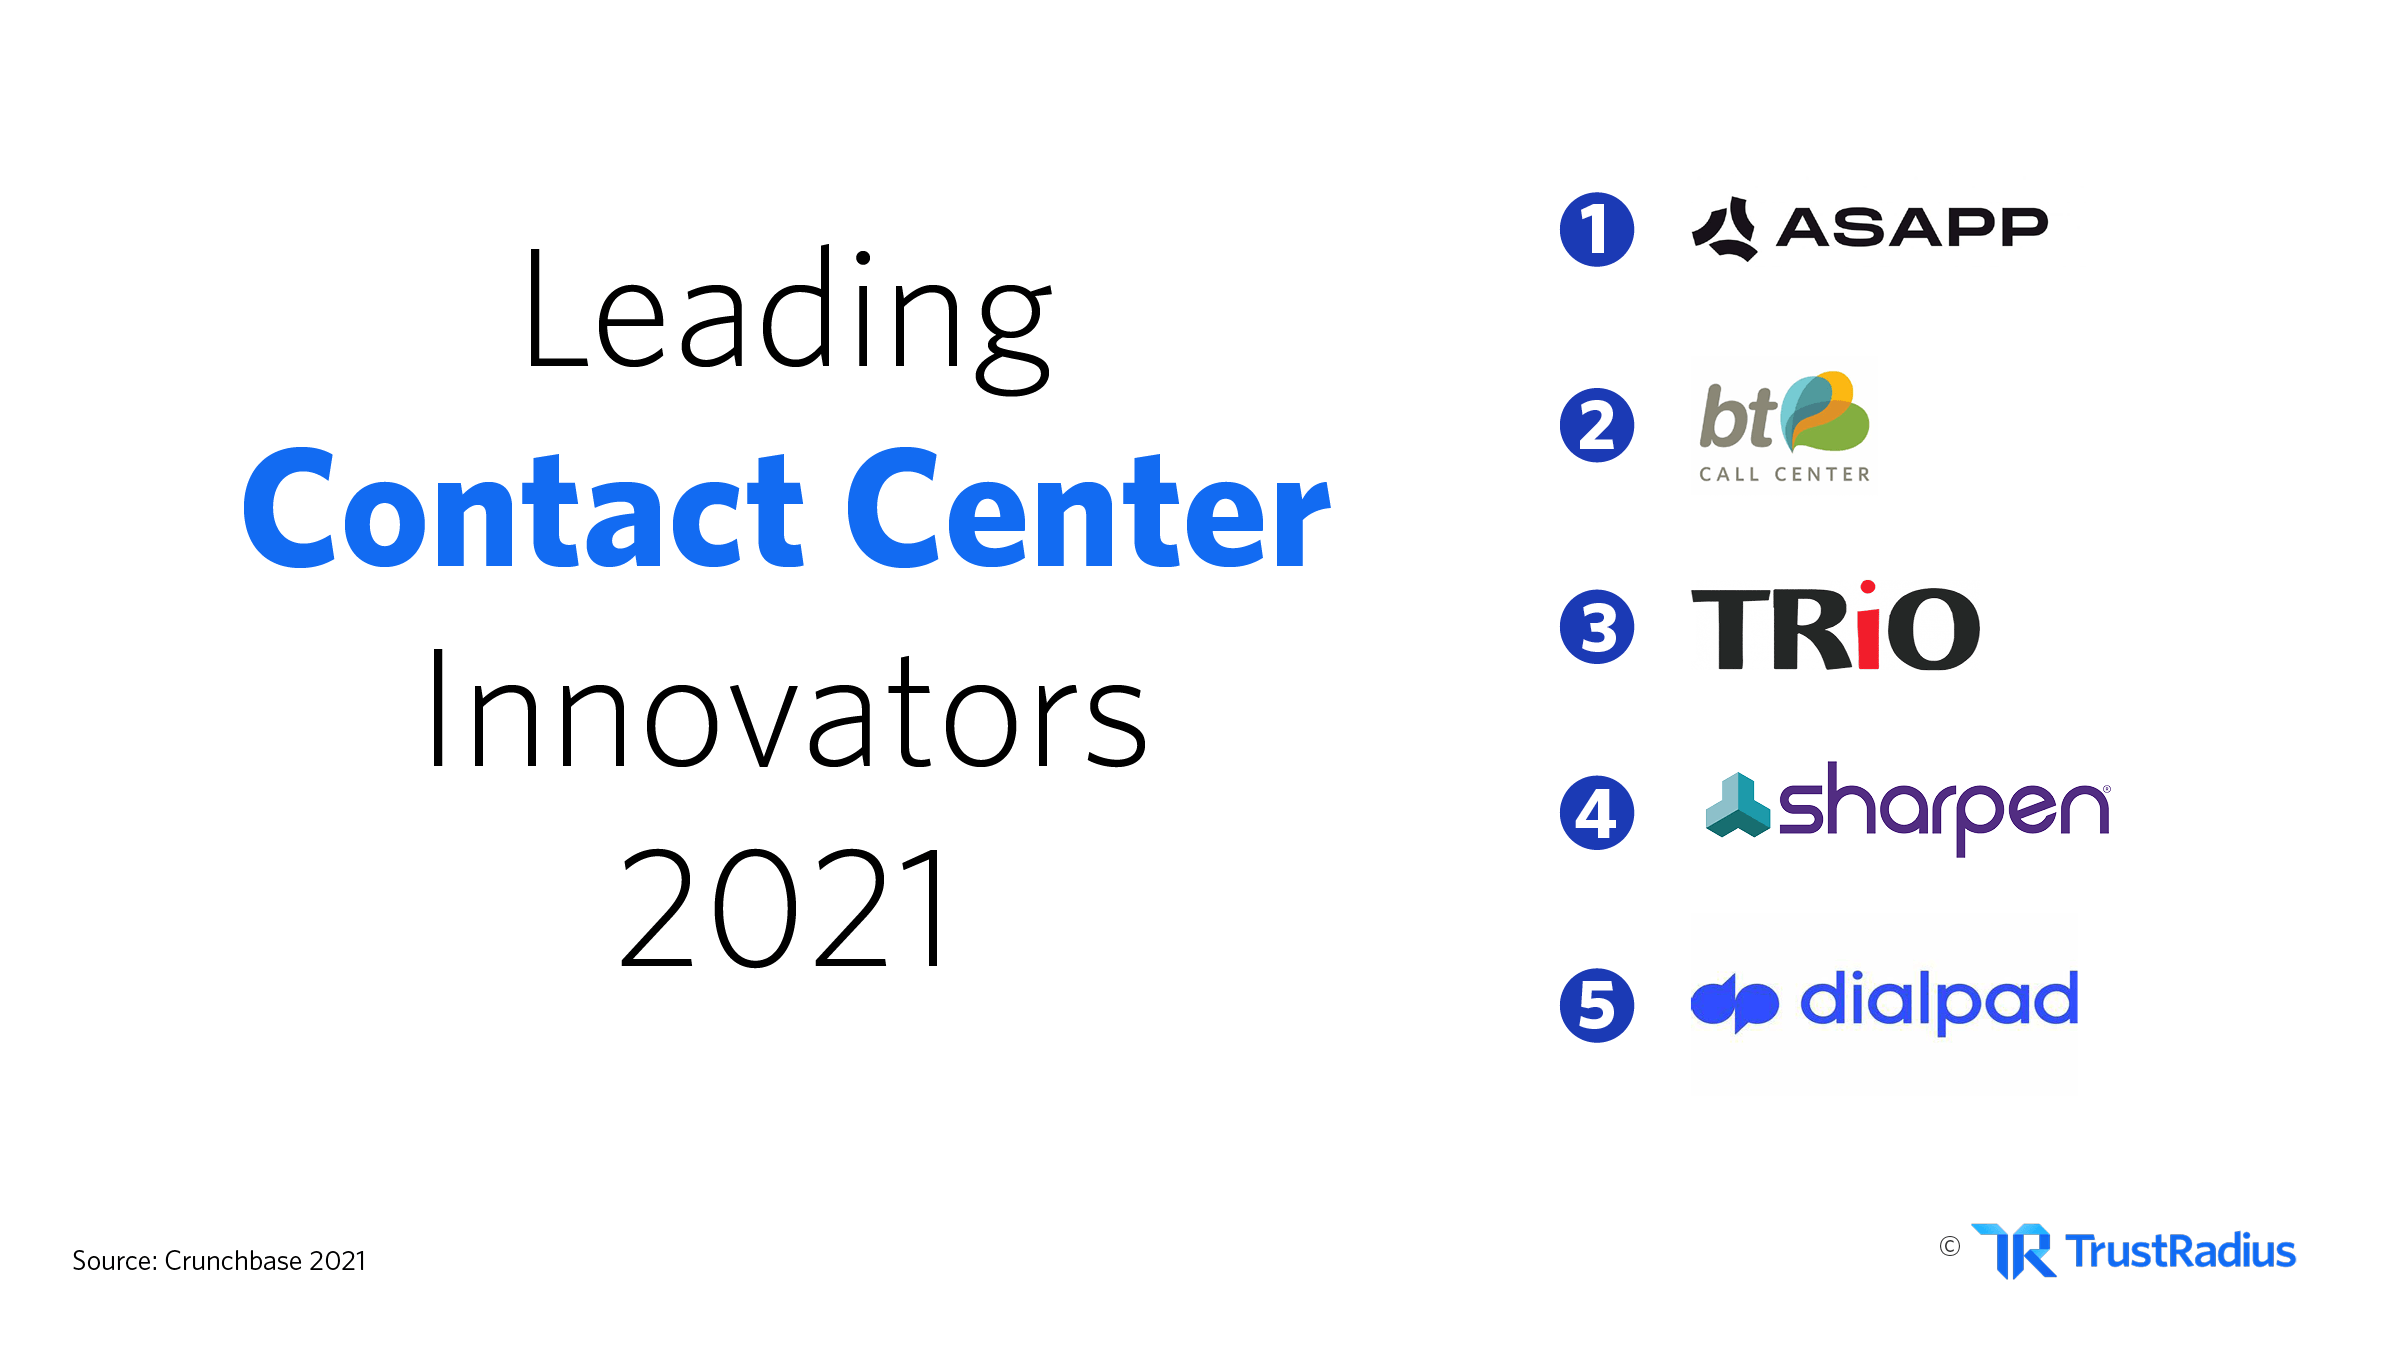 Leading contact center innovators in 2021